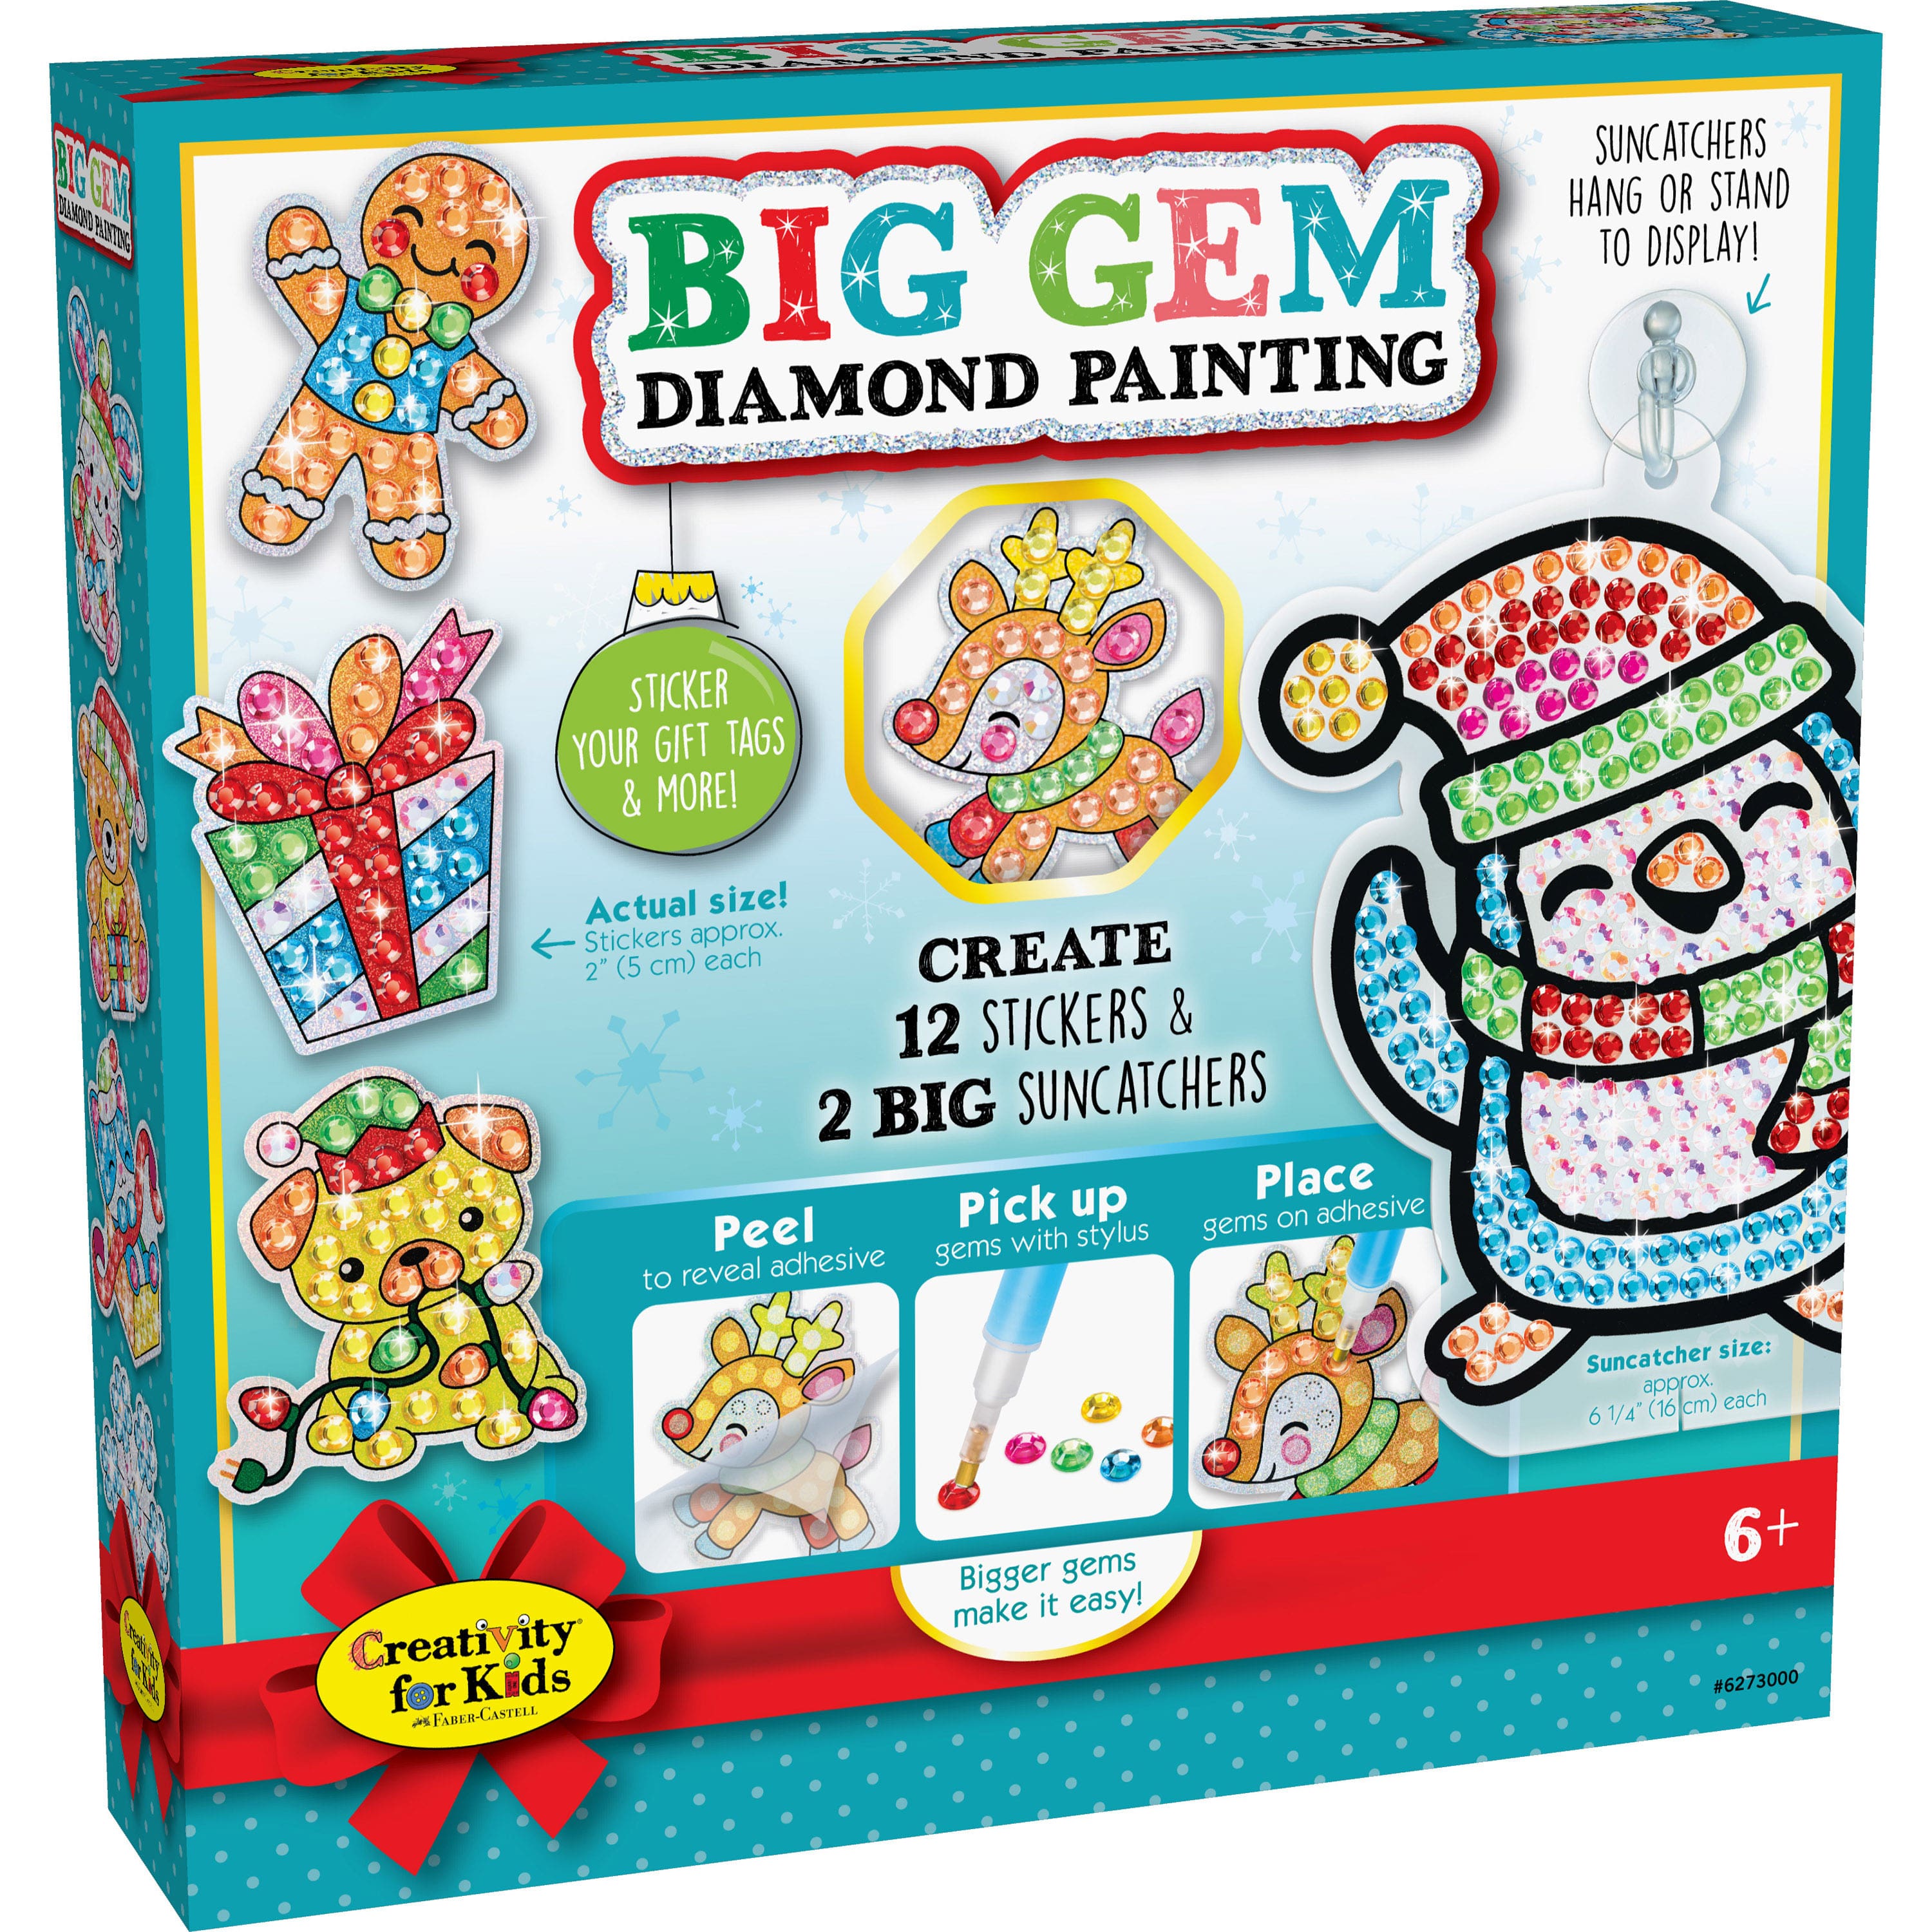 Buy TOCARE Large 5D Diamond Painting Kits for Adults Cat Clearance